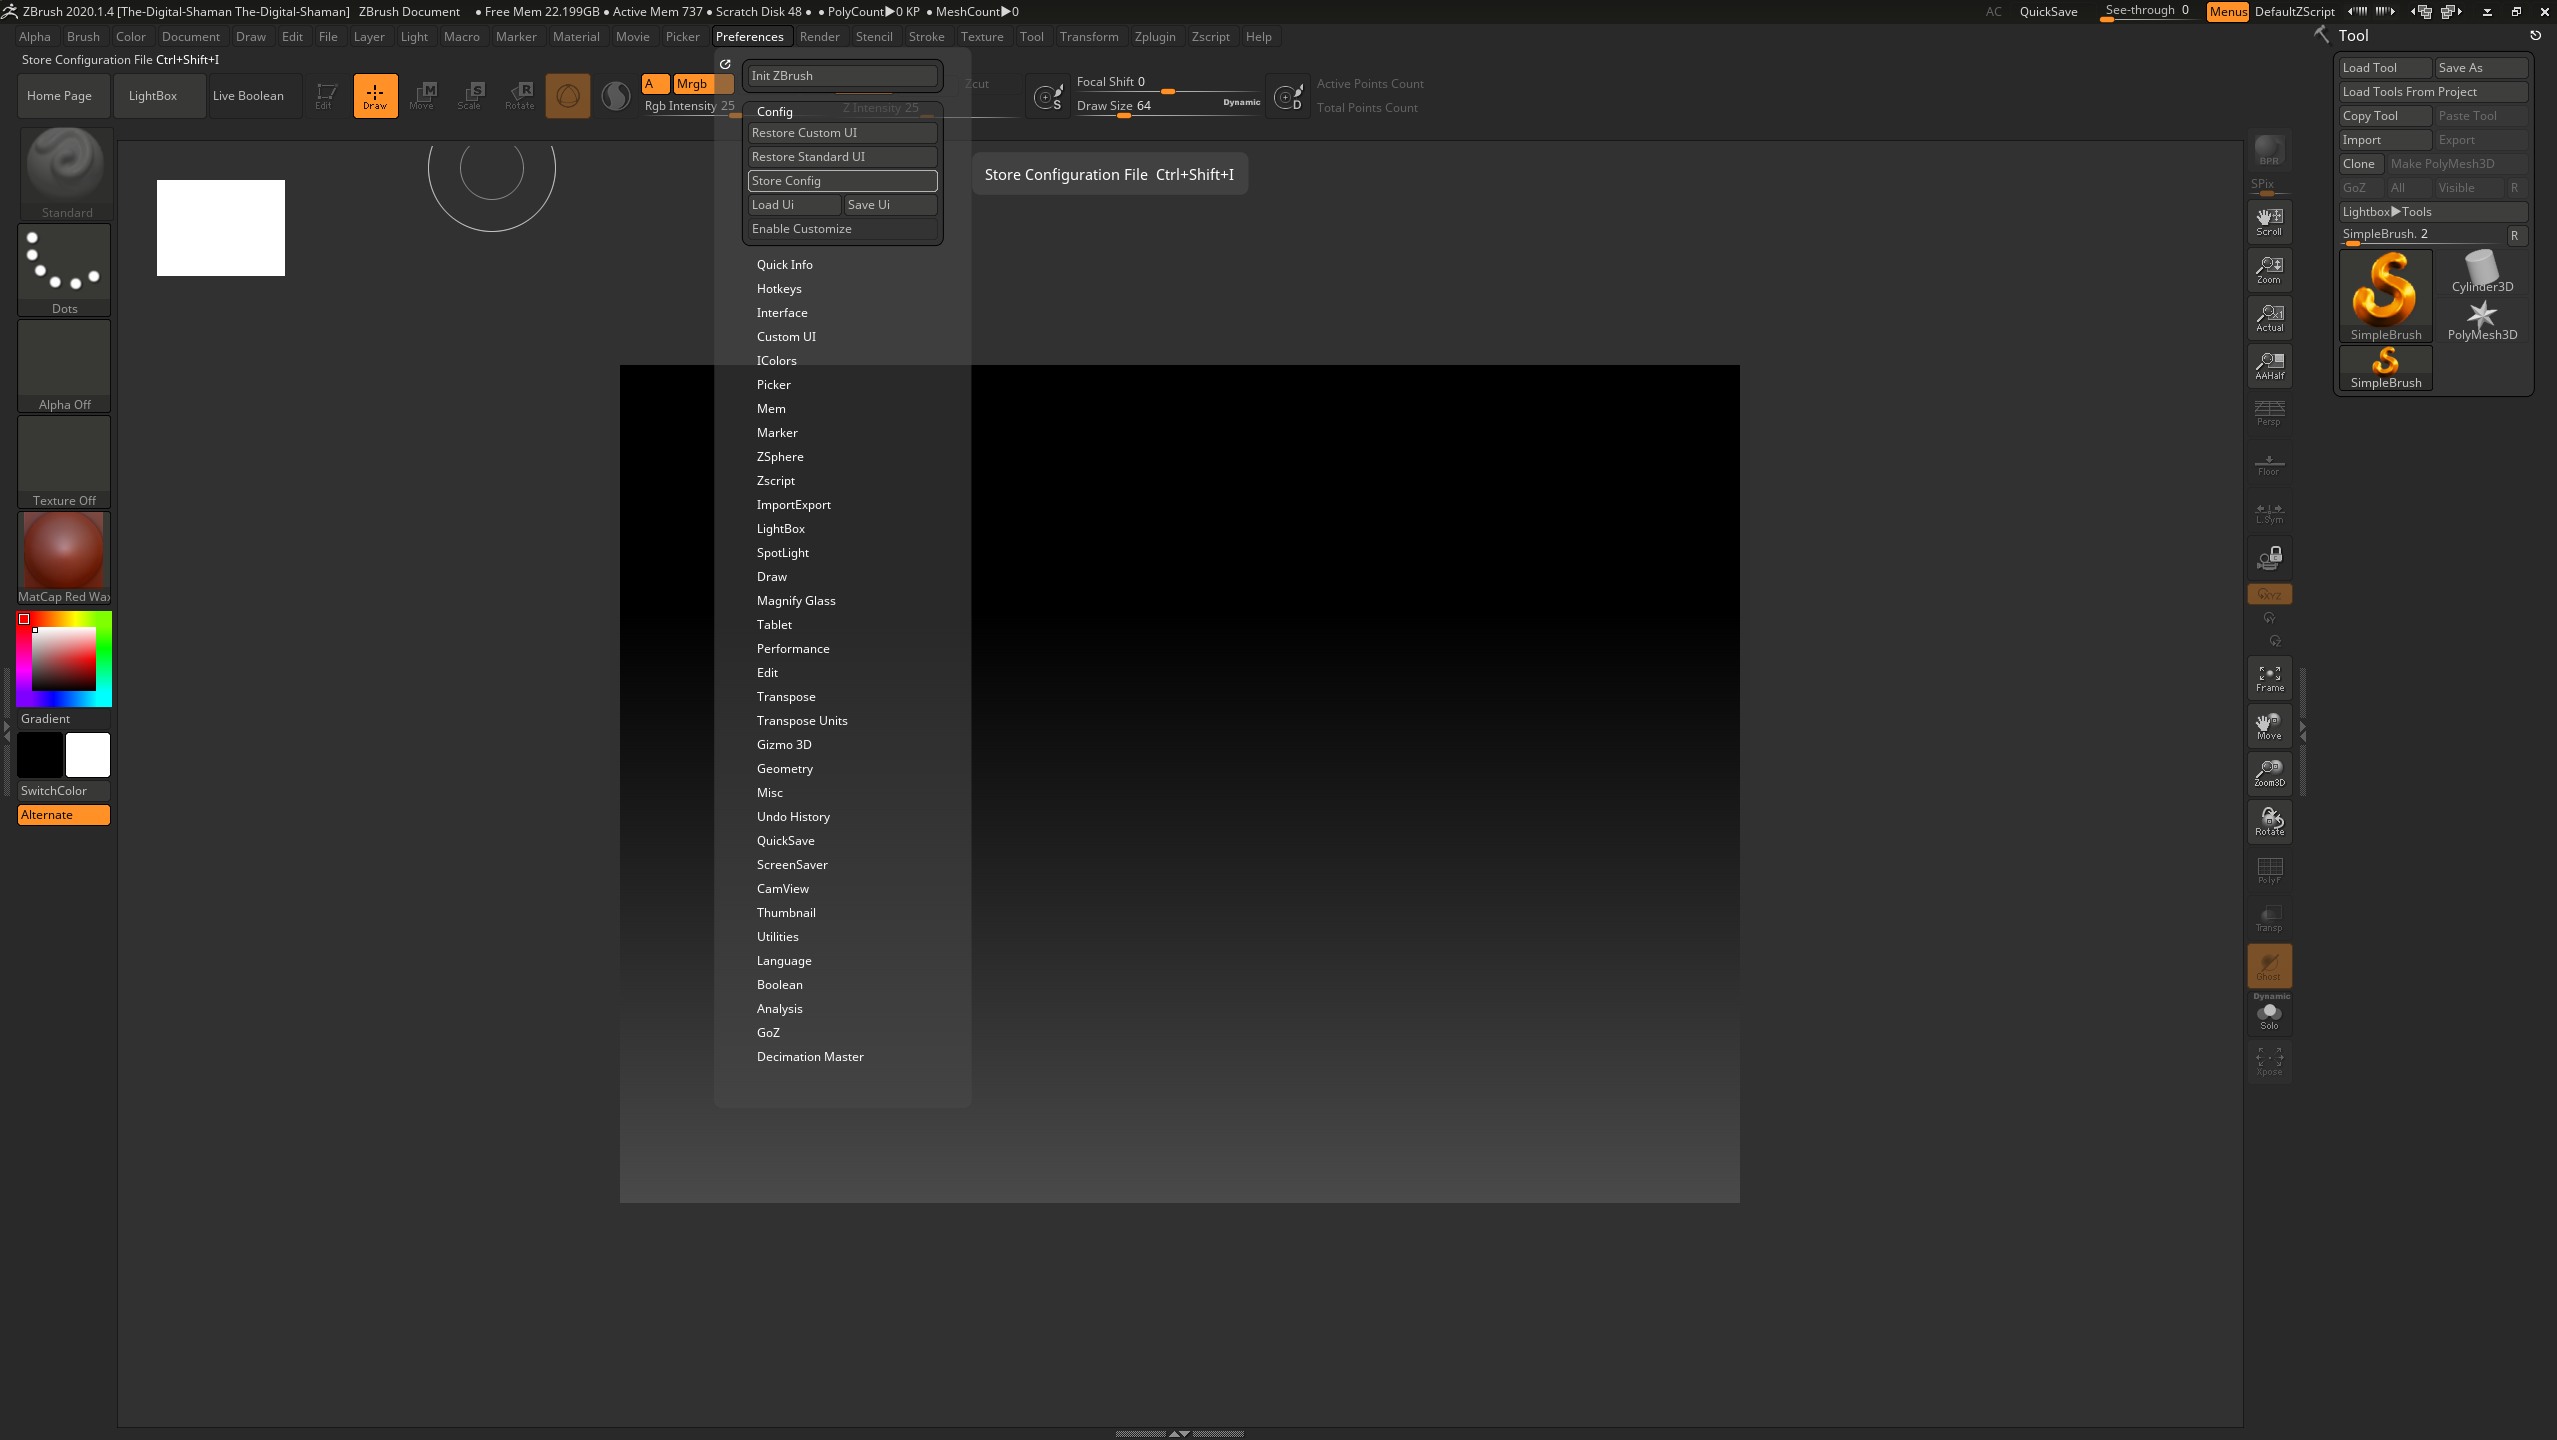 store canvas setting in zbrush